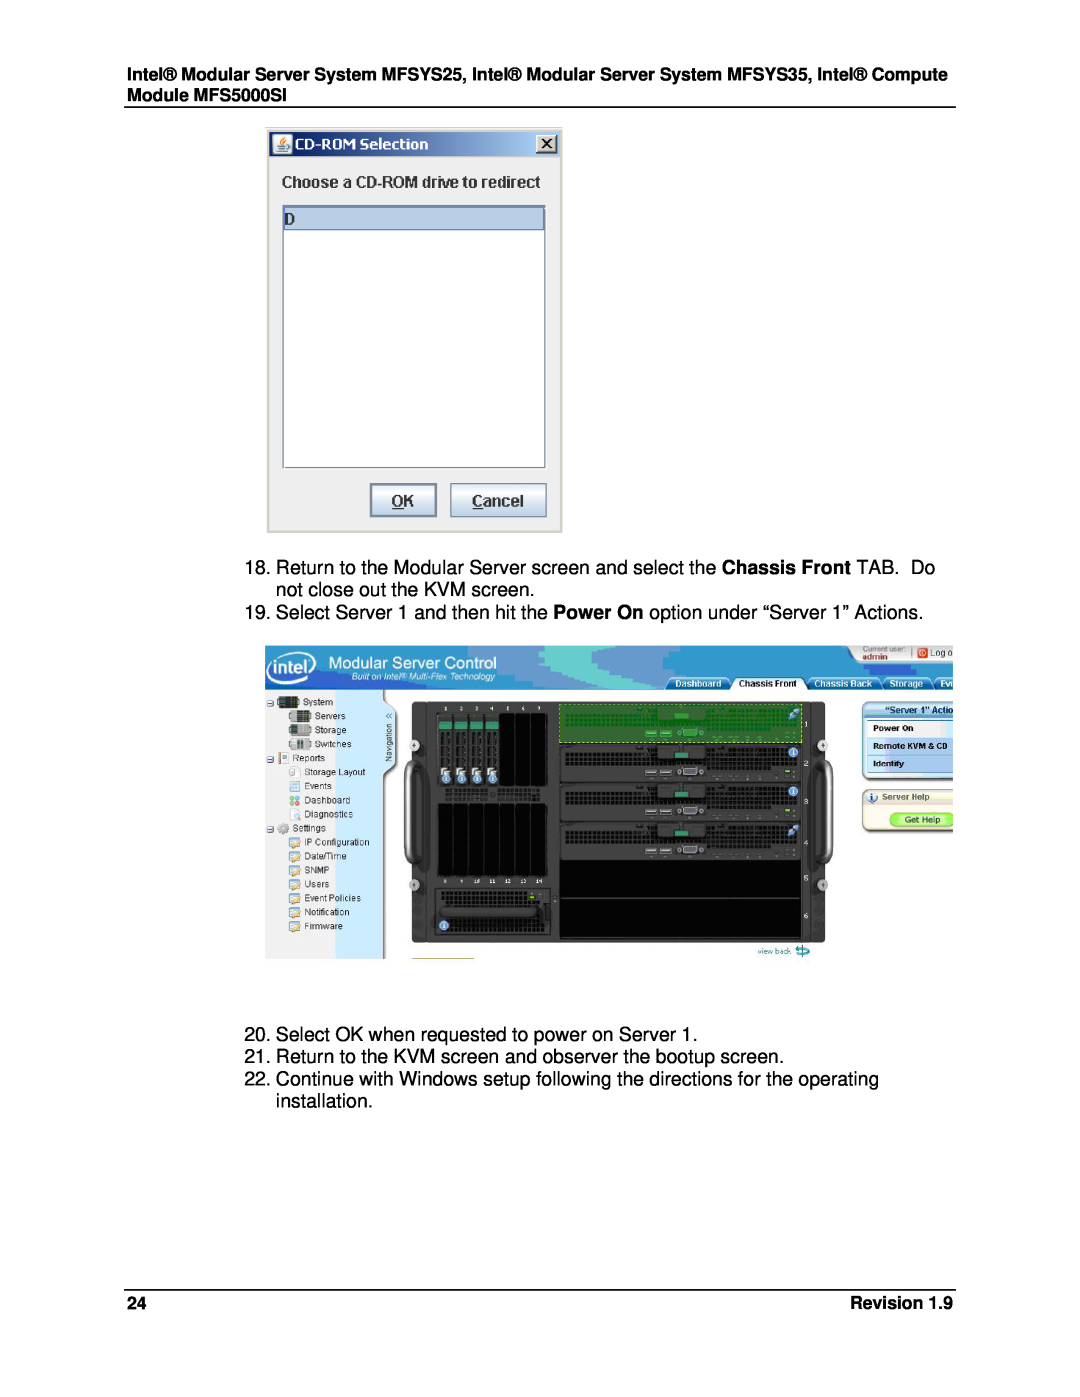 Intel MFSYS25, MFS5000SI, MFSYS35 manual Select OK when requested to power on Server 